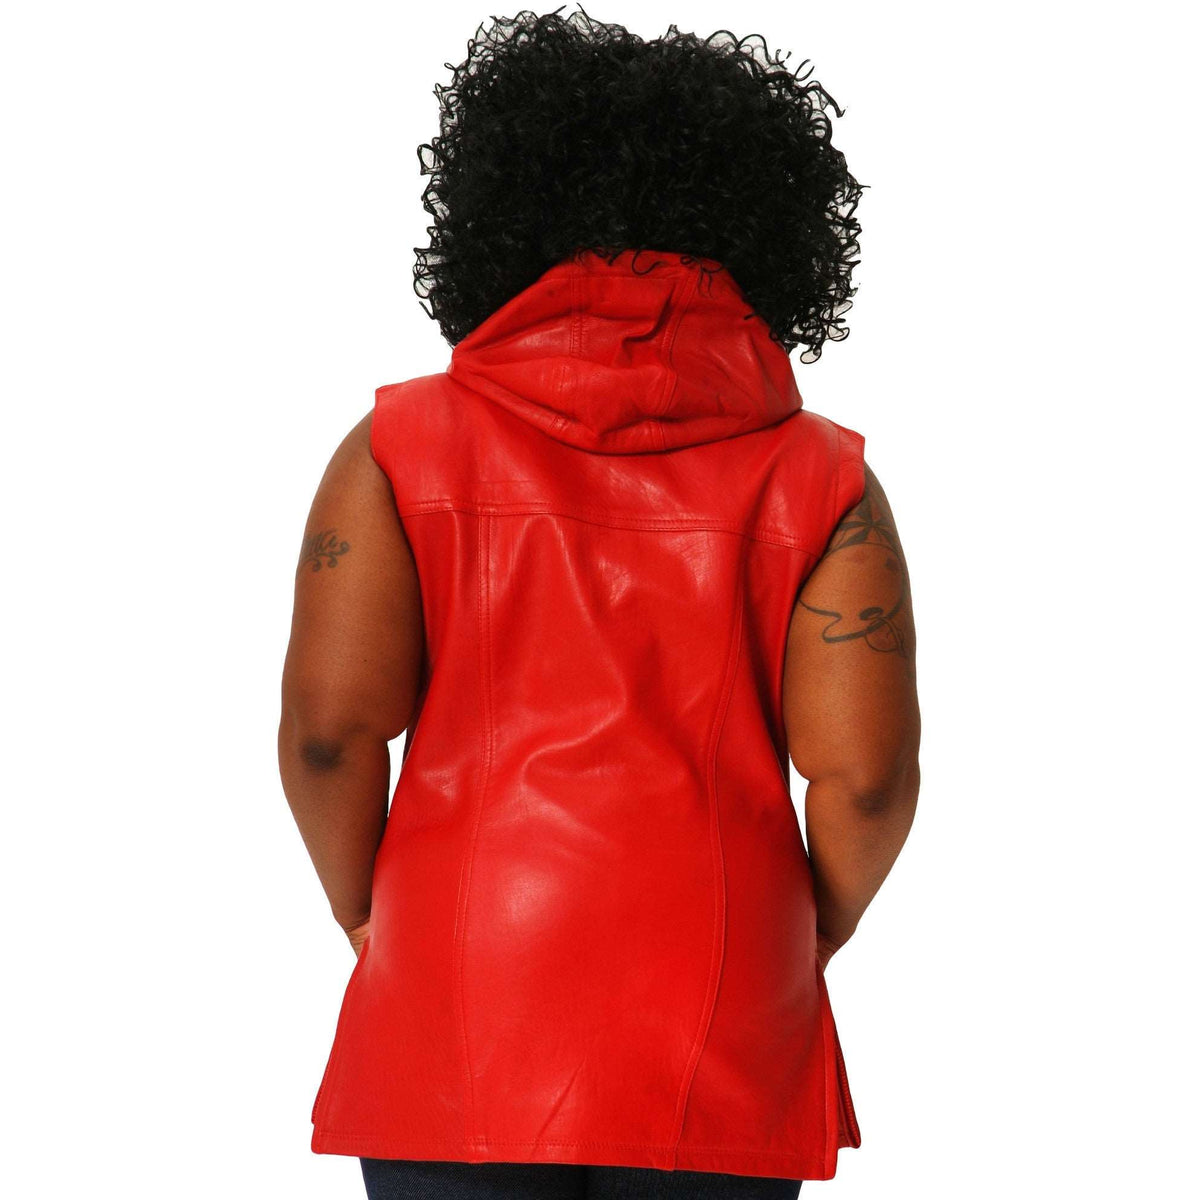 Womens red leather hooded tee back